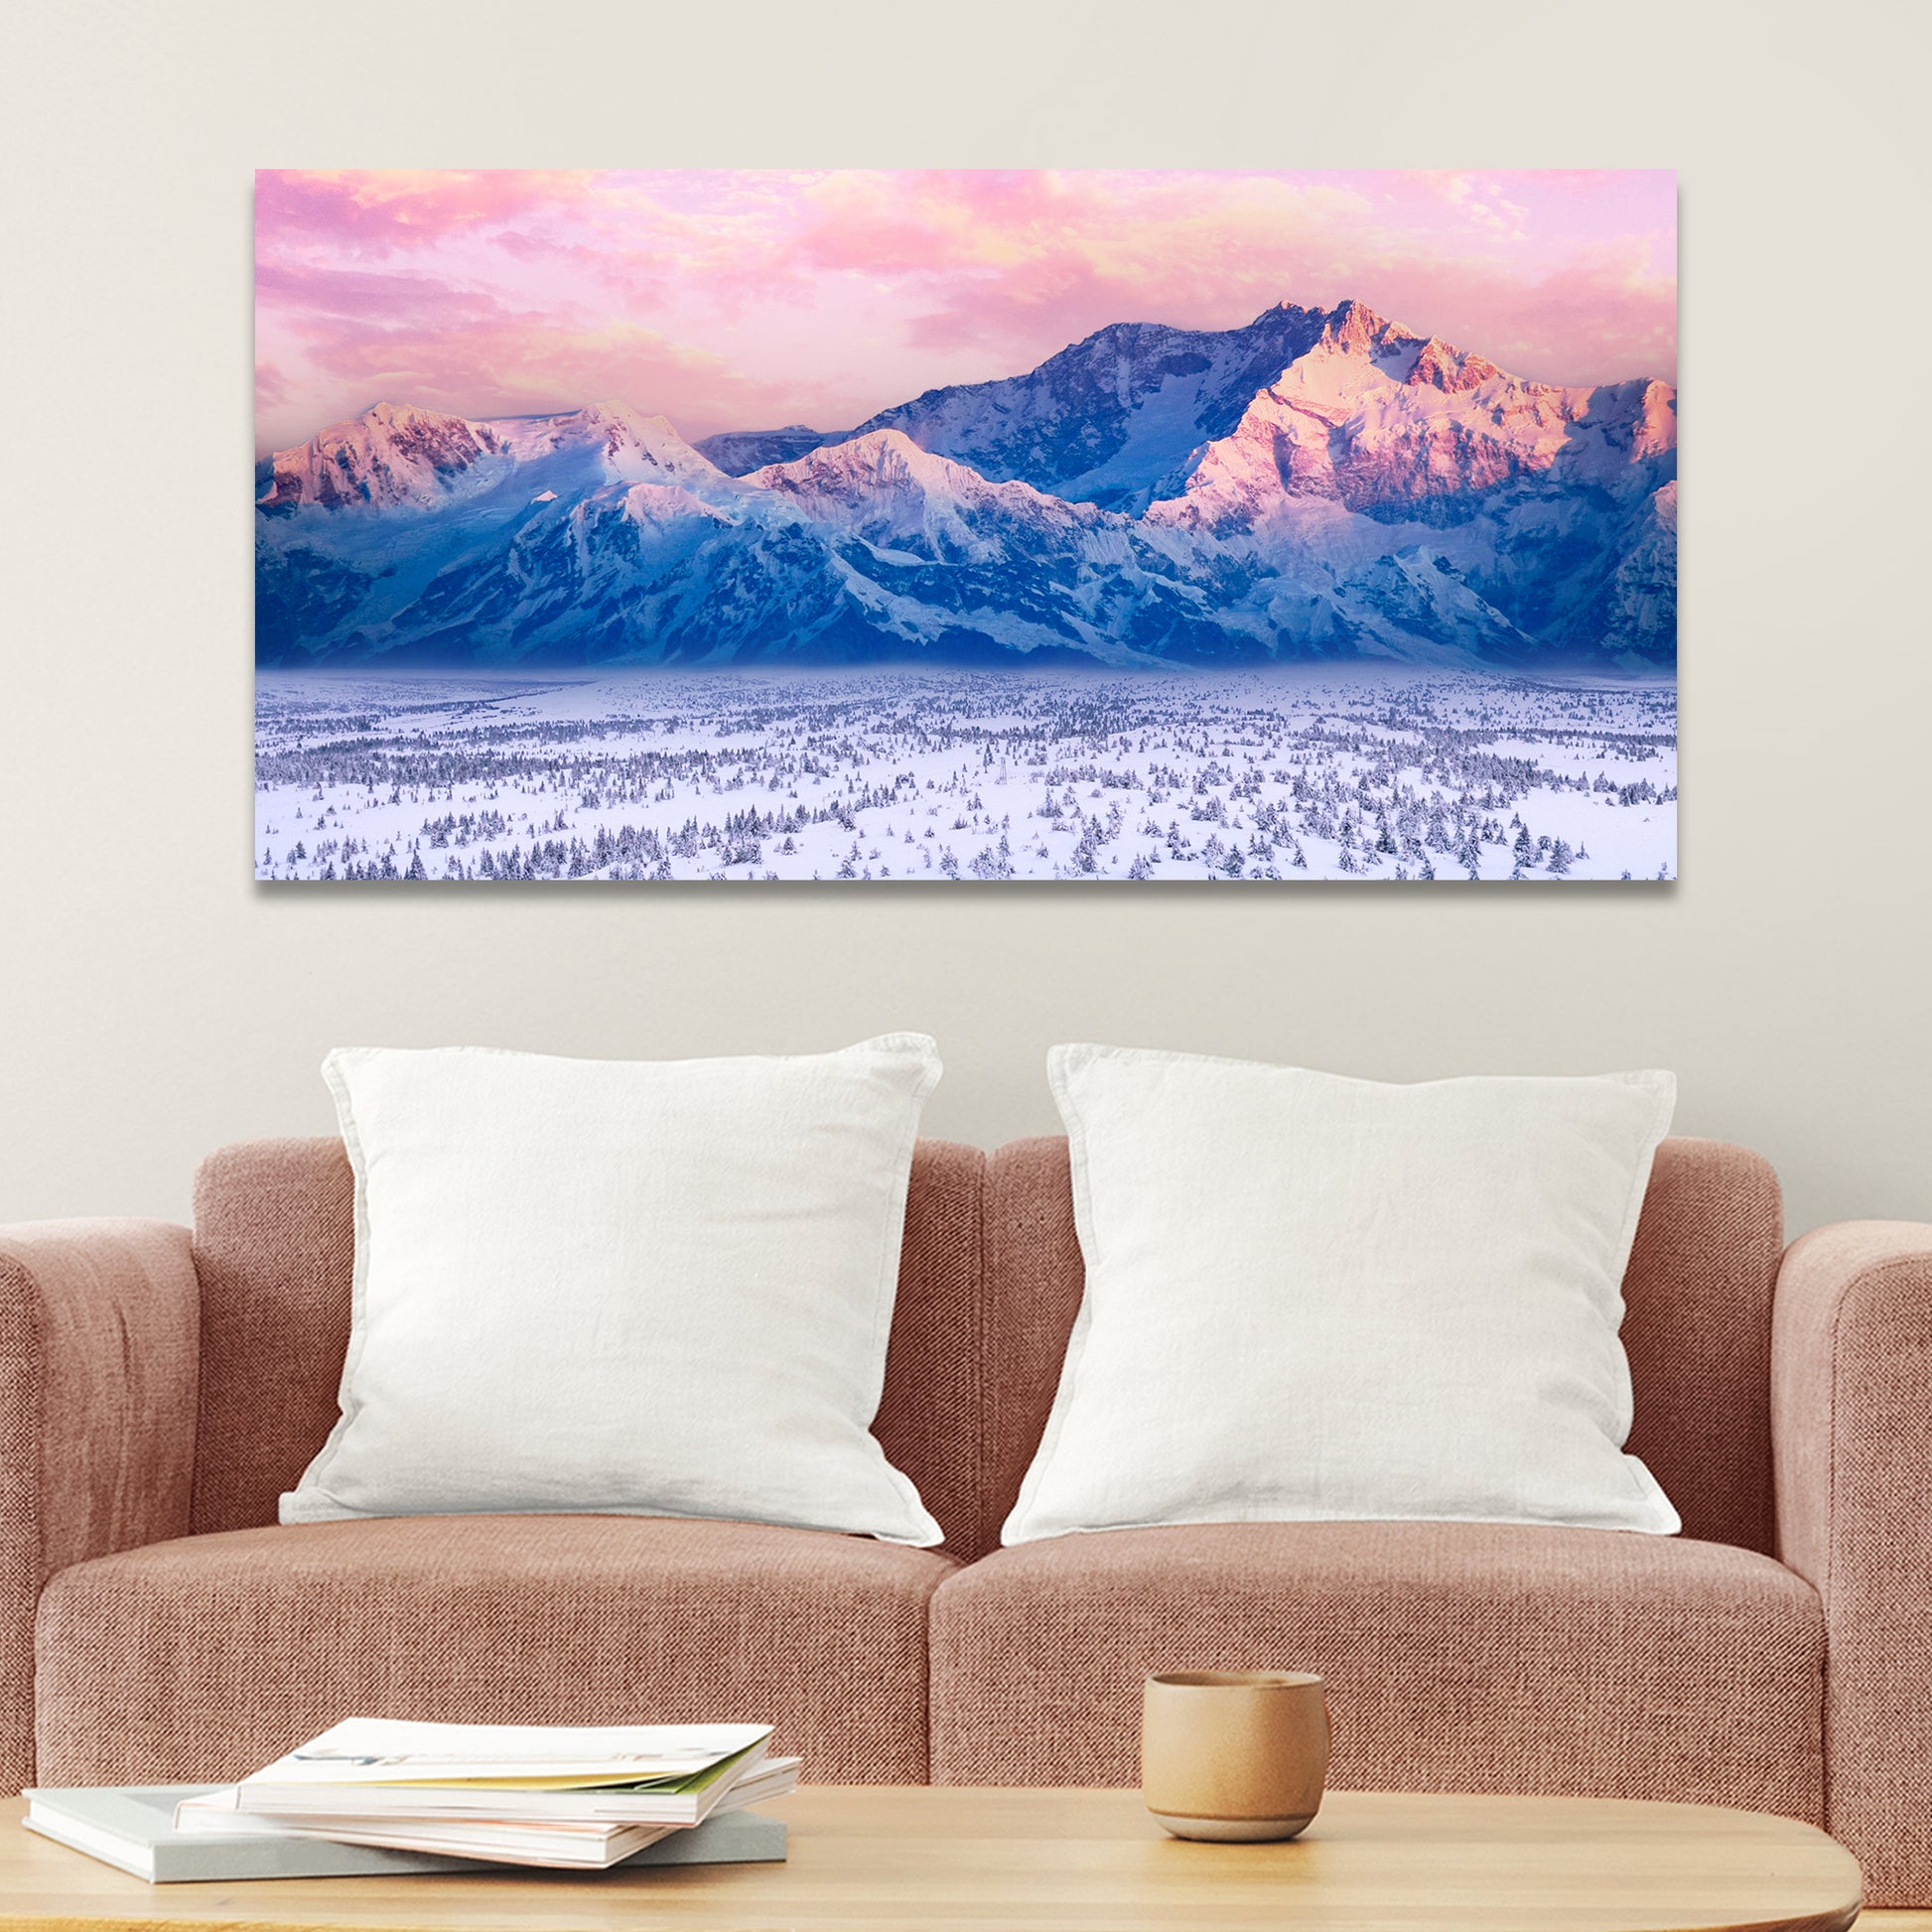 Pink Skies Over Snow Capped Mountain Canvas Wall Art Style 2 - Image by Tailored Canvases